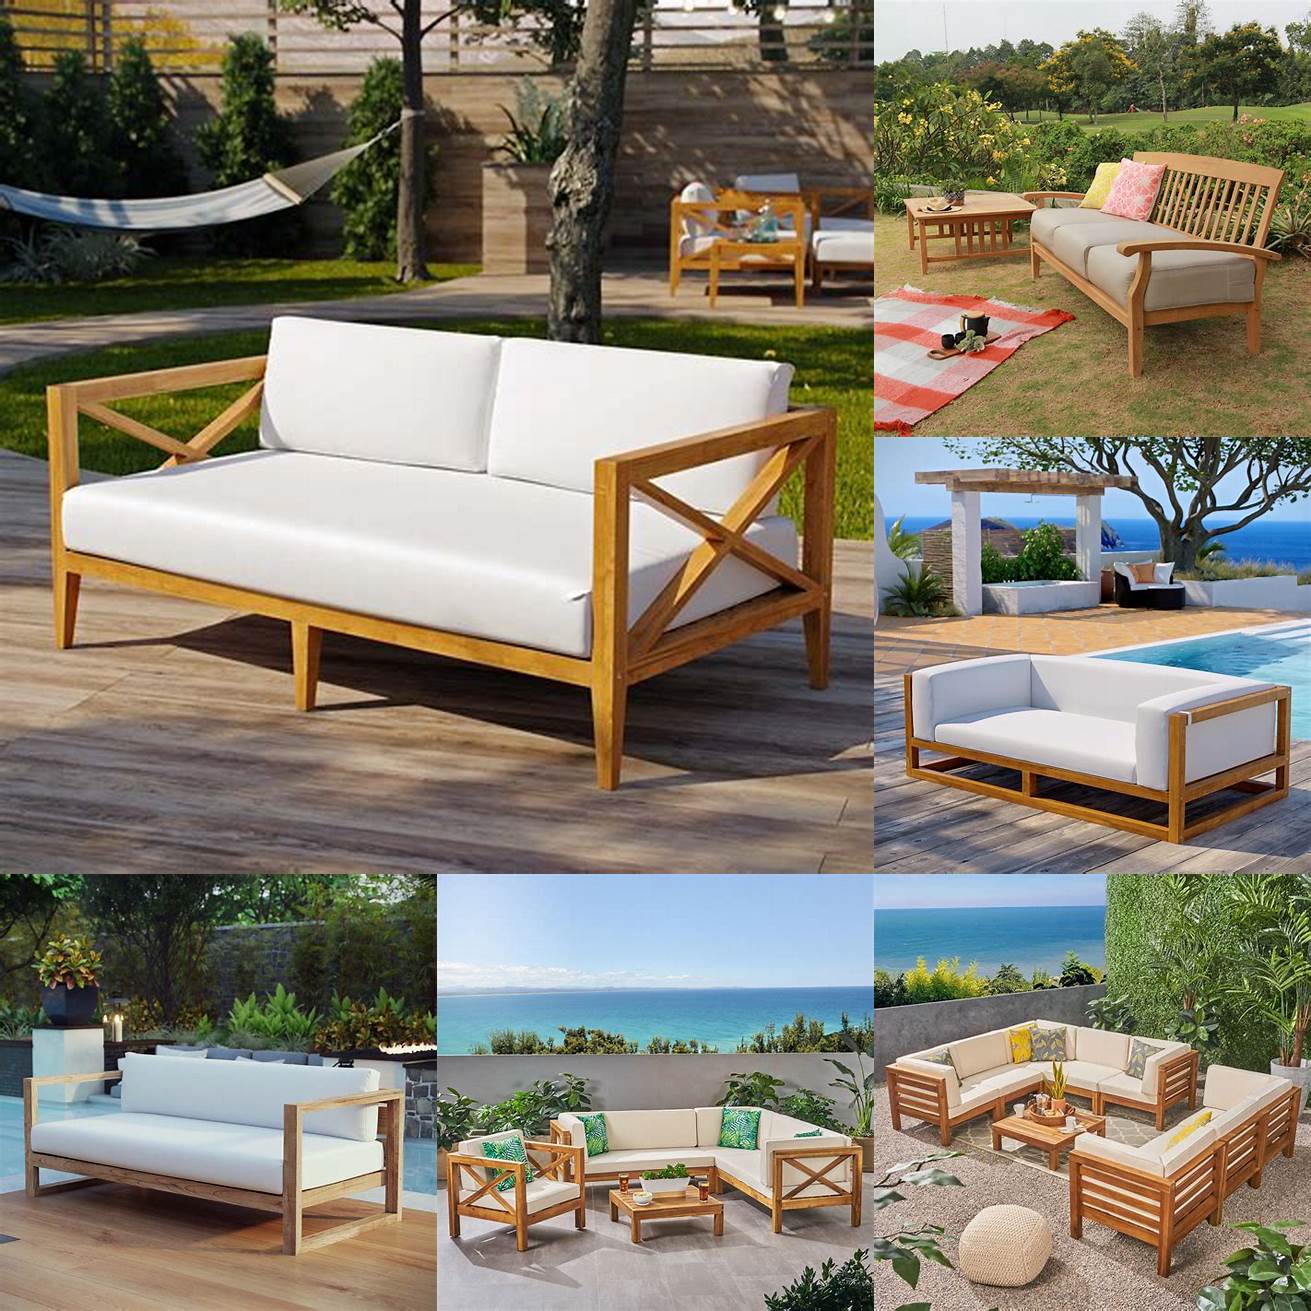 Teak Wood Outdoor Sofa with Benches